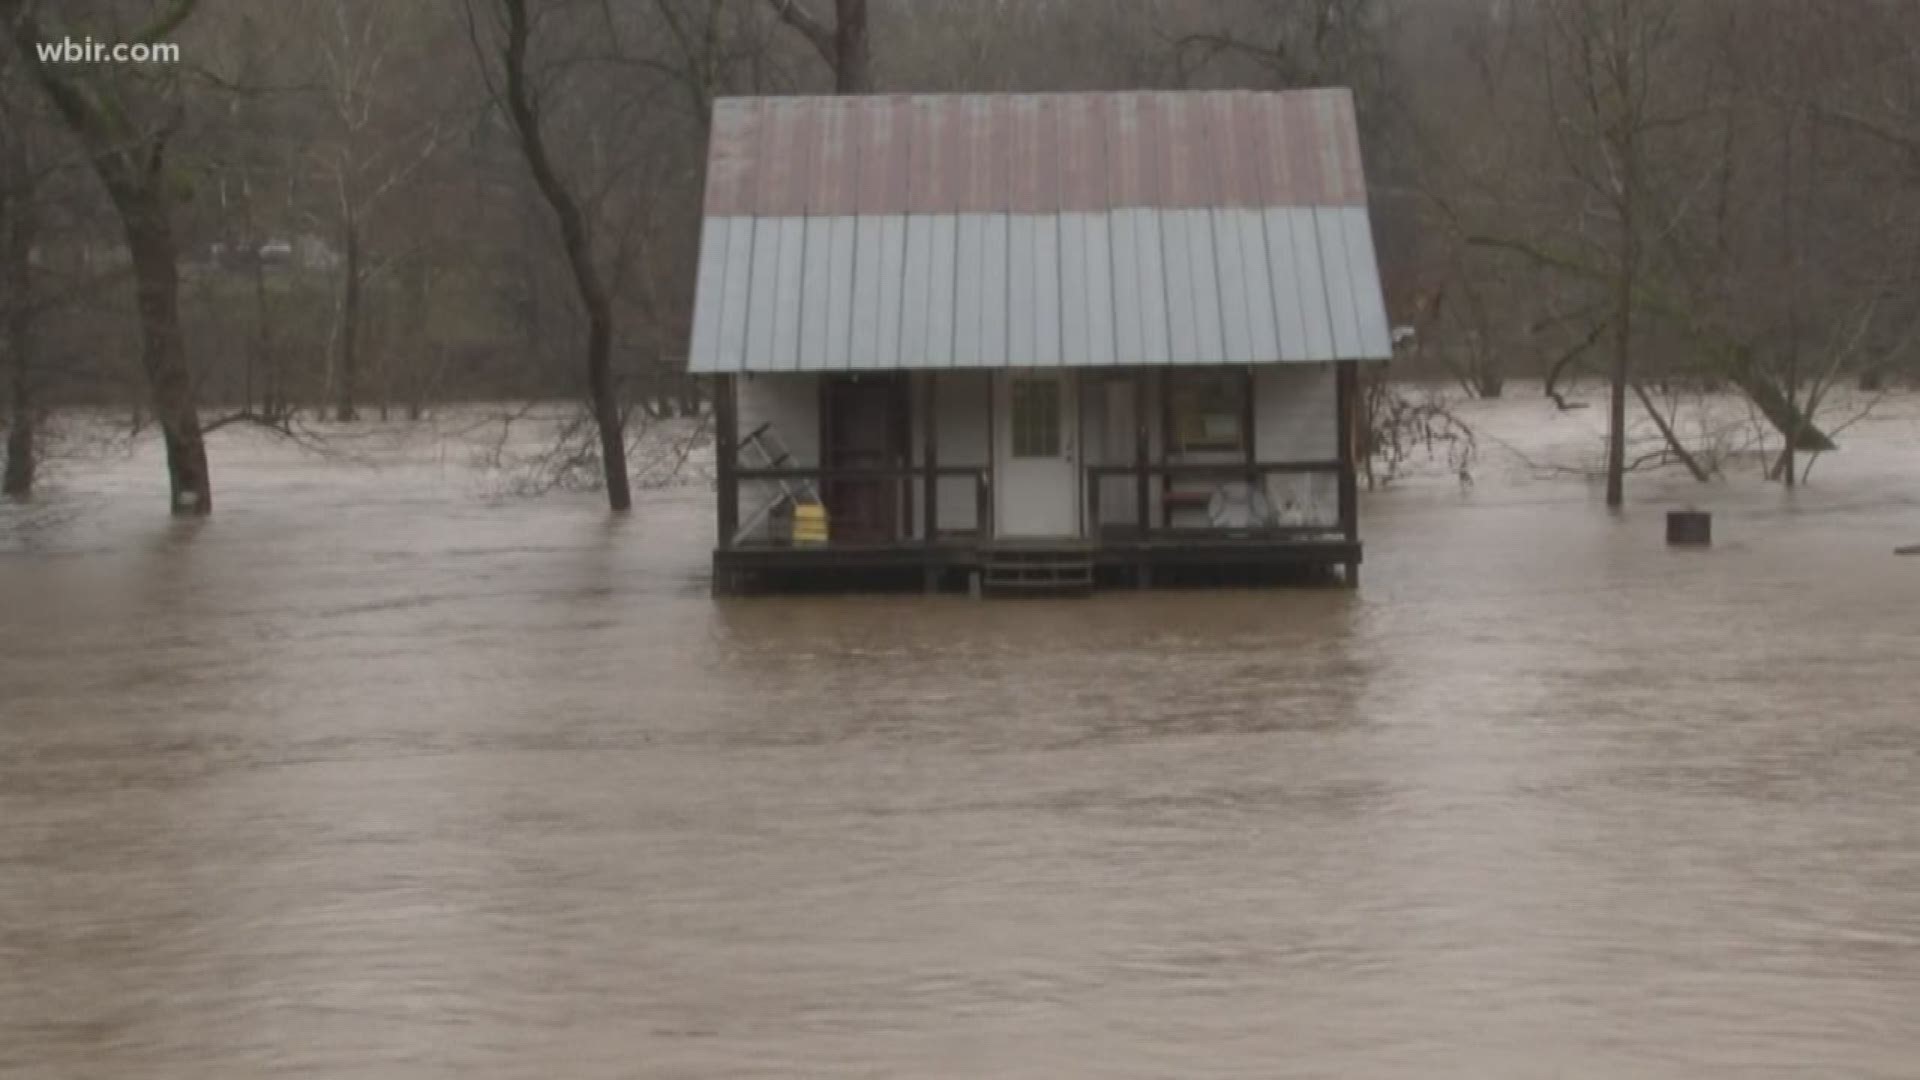 The TVA said water levels are not anywhere near where they were in February 2019.